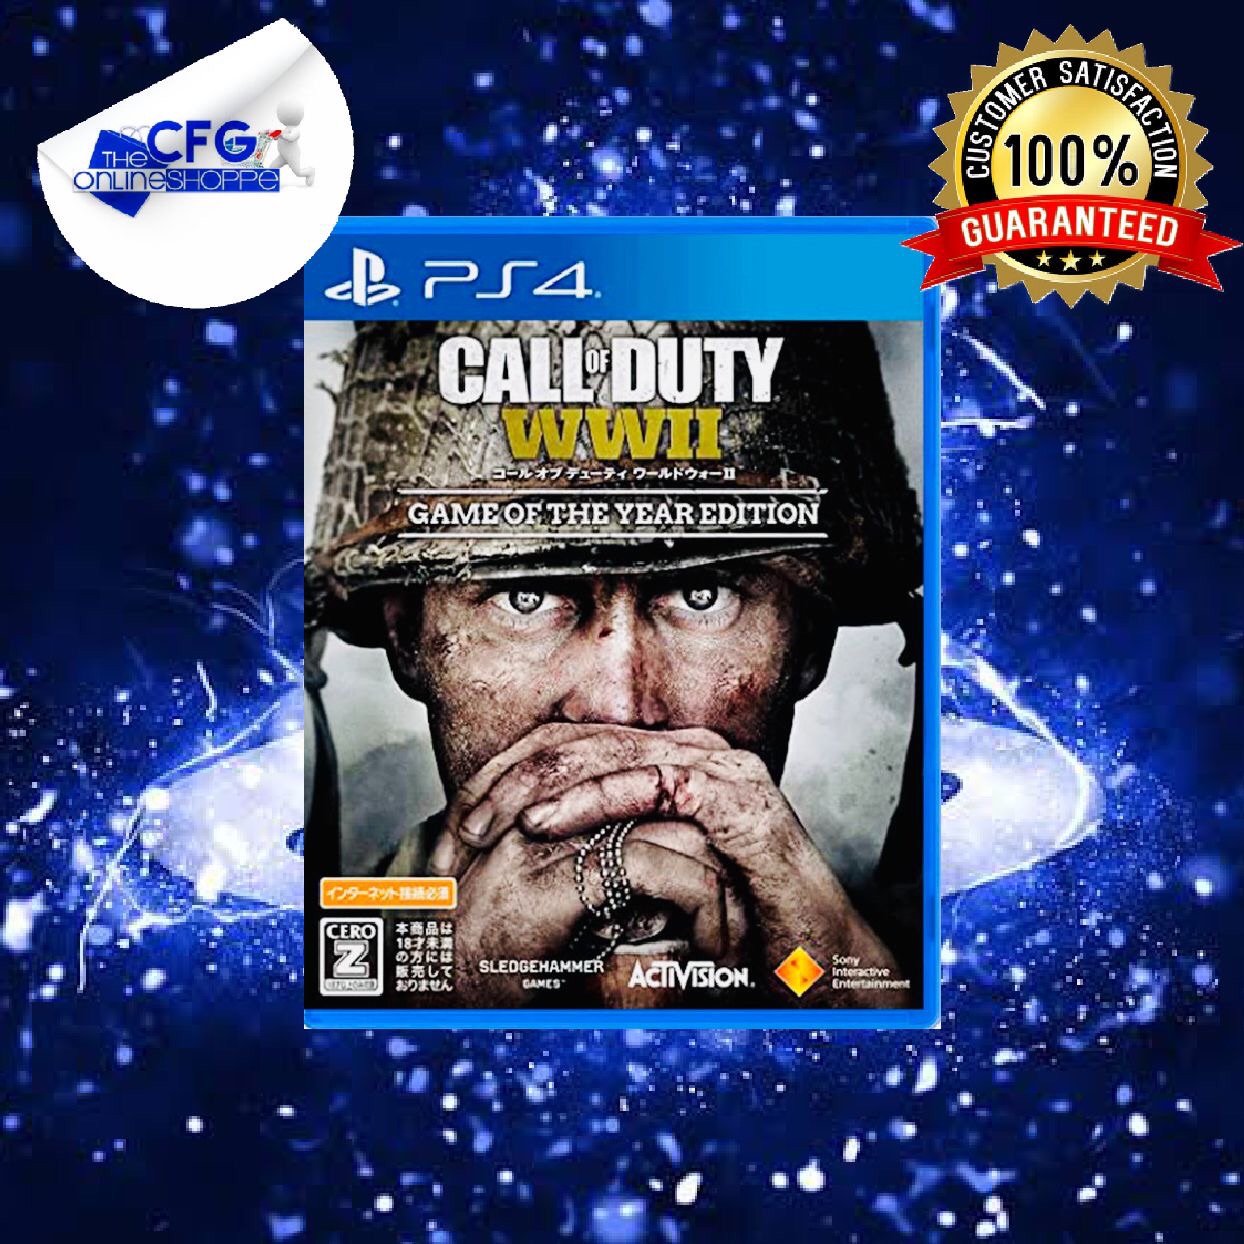 Call of Duty: WWII (PS4) - The Cover Project